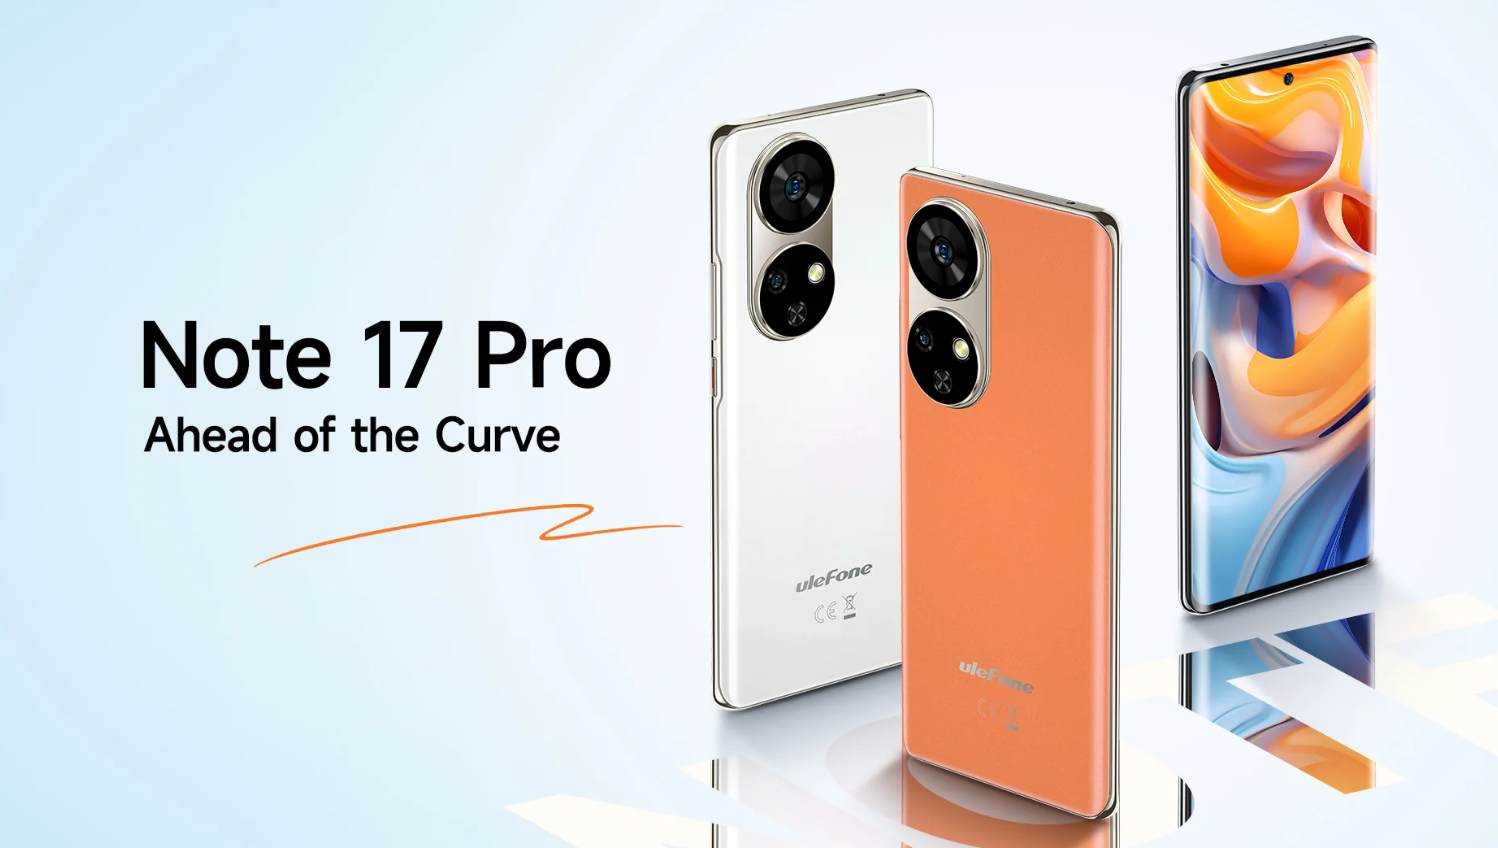 Ulefone Note 17 Pro: Featuring 6.78″ AMOLED Display and
108MP Camera, now on Amazon